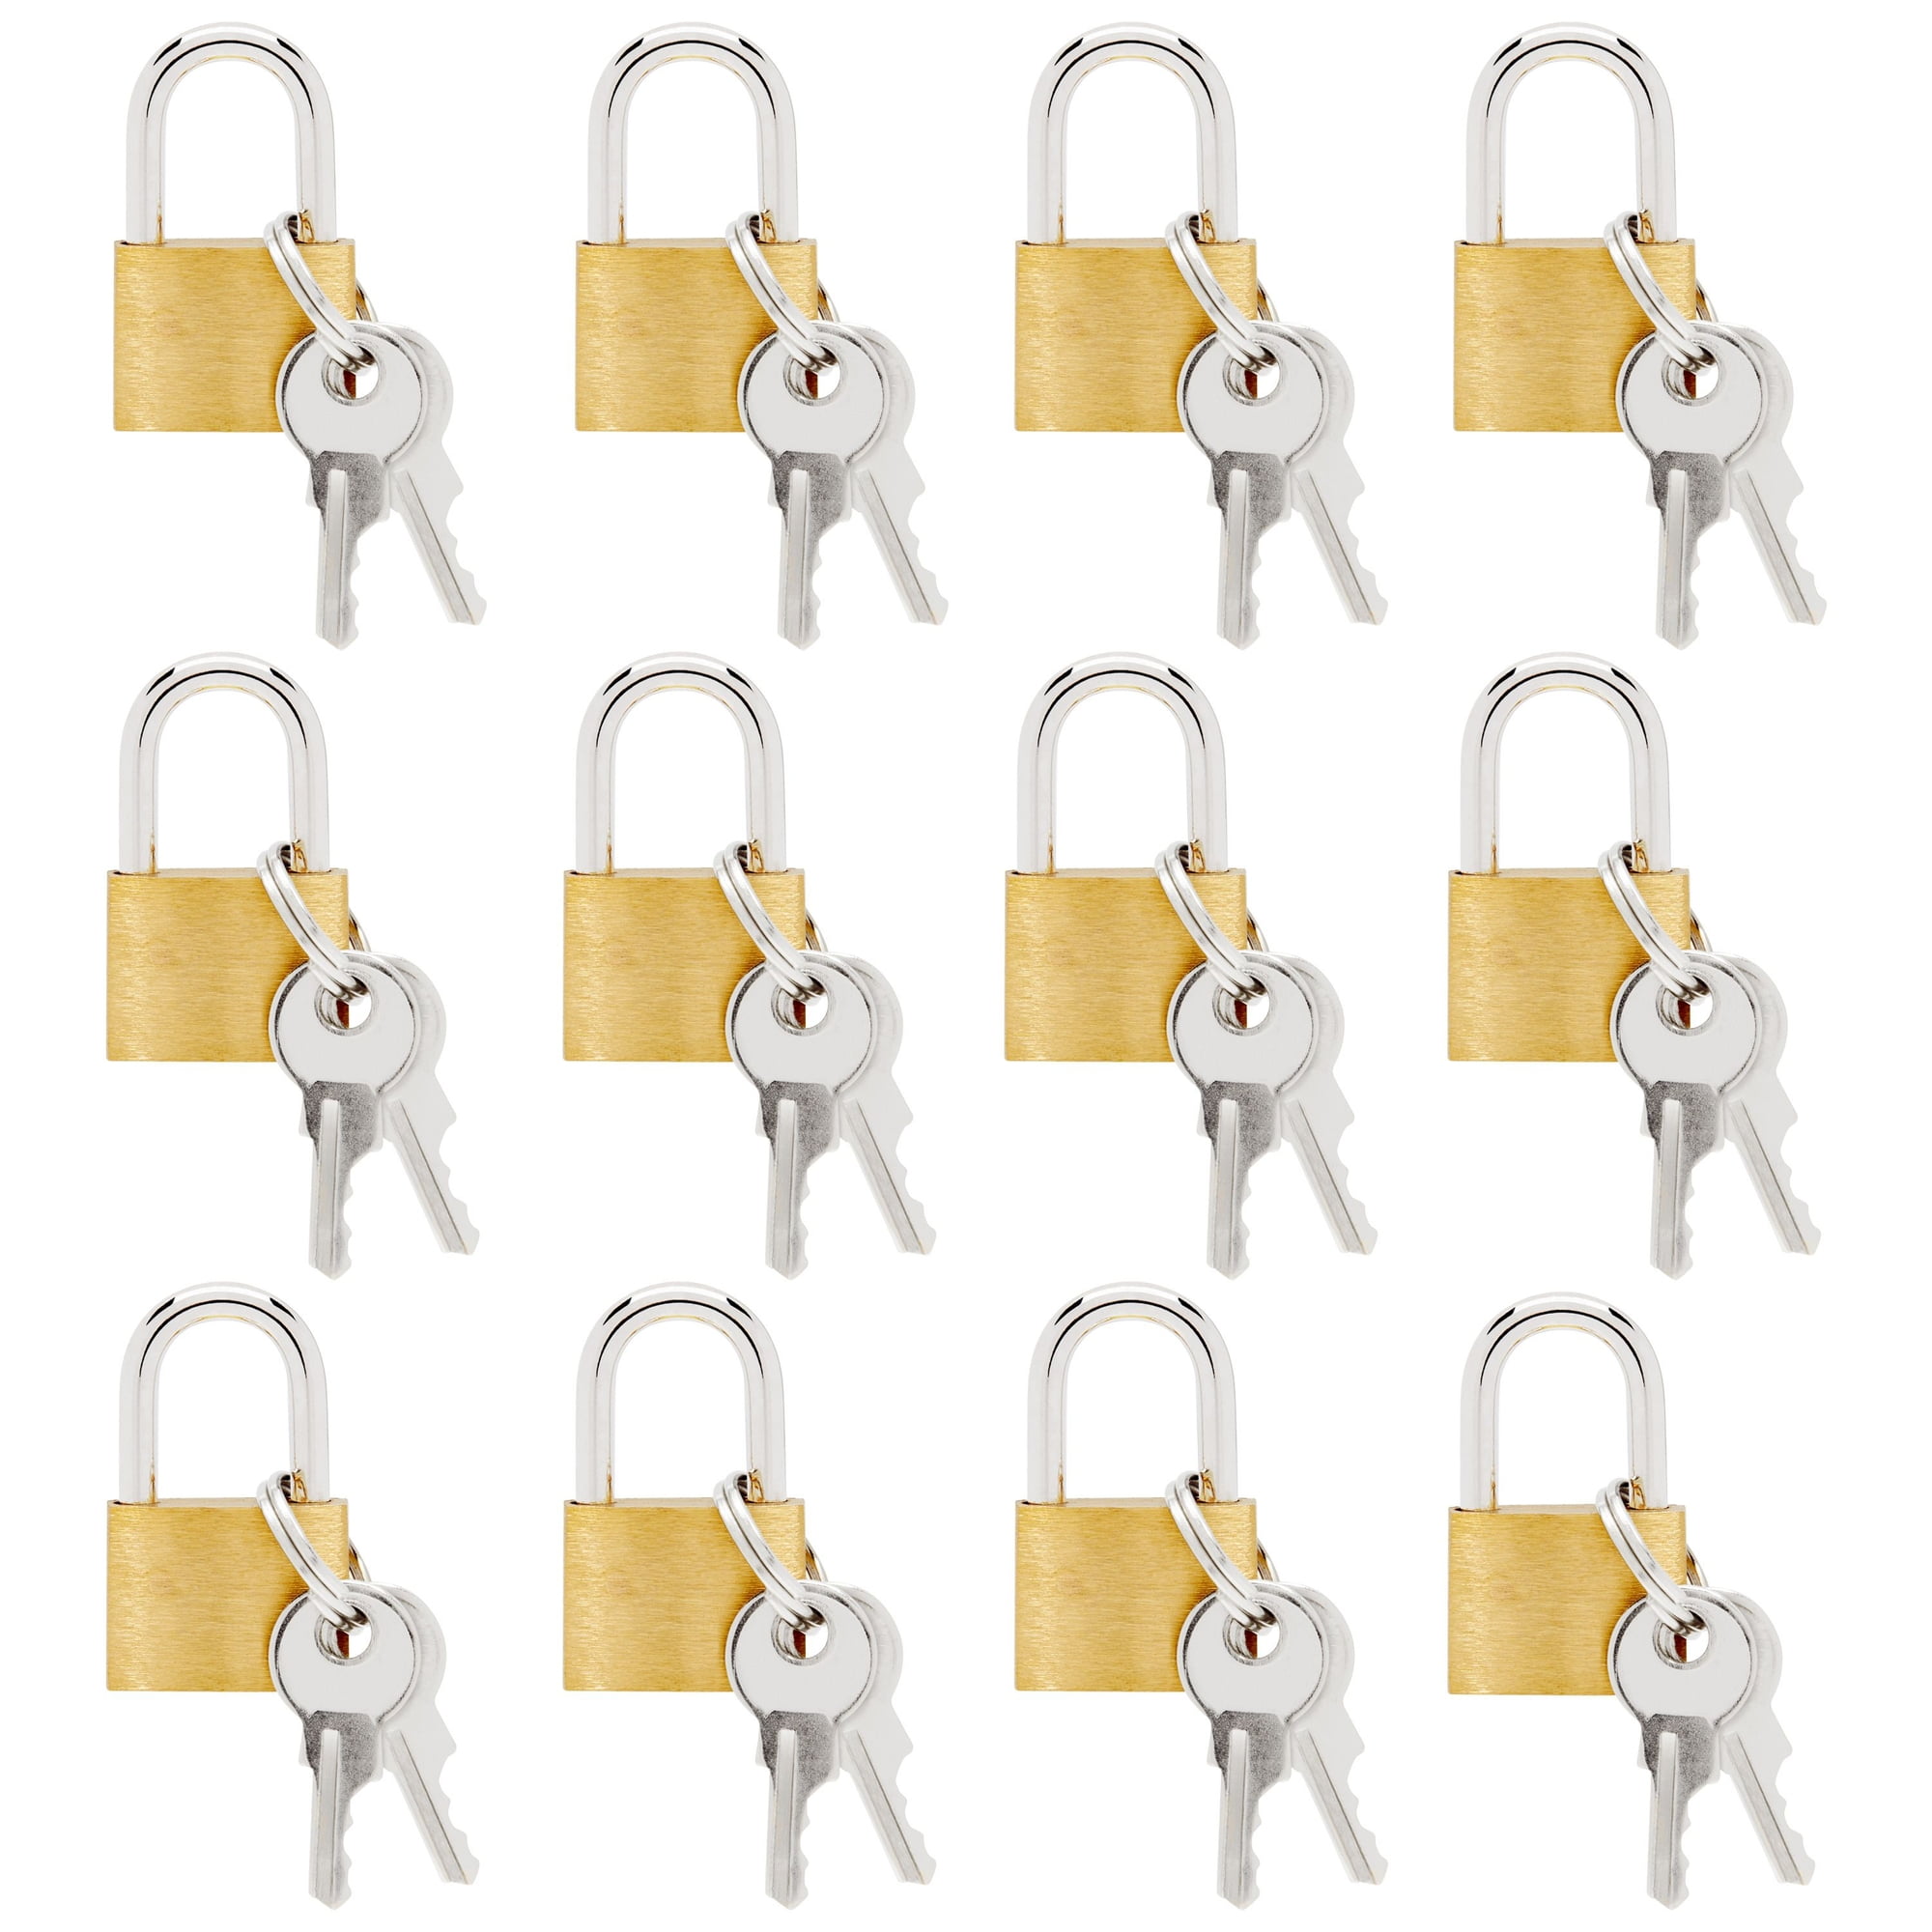 Padlock For Outdoor Shed